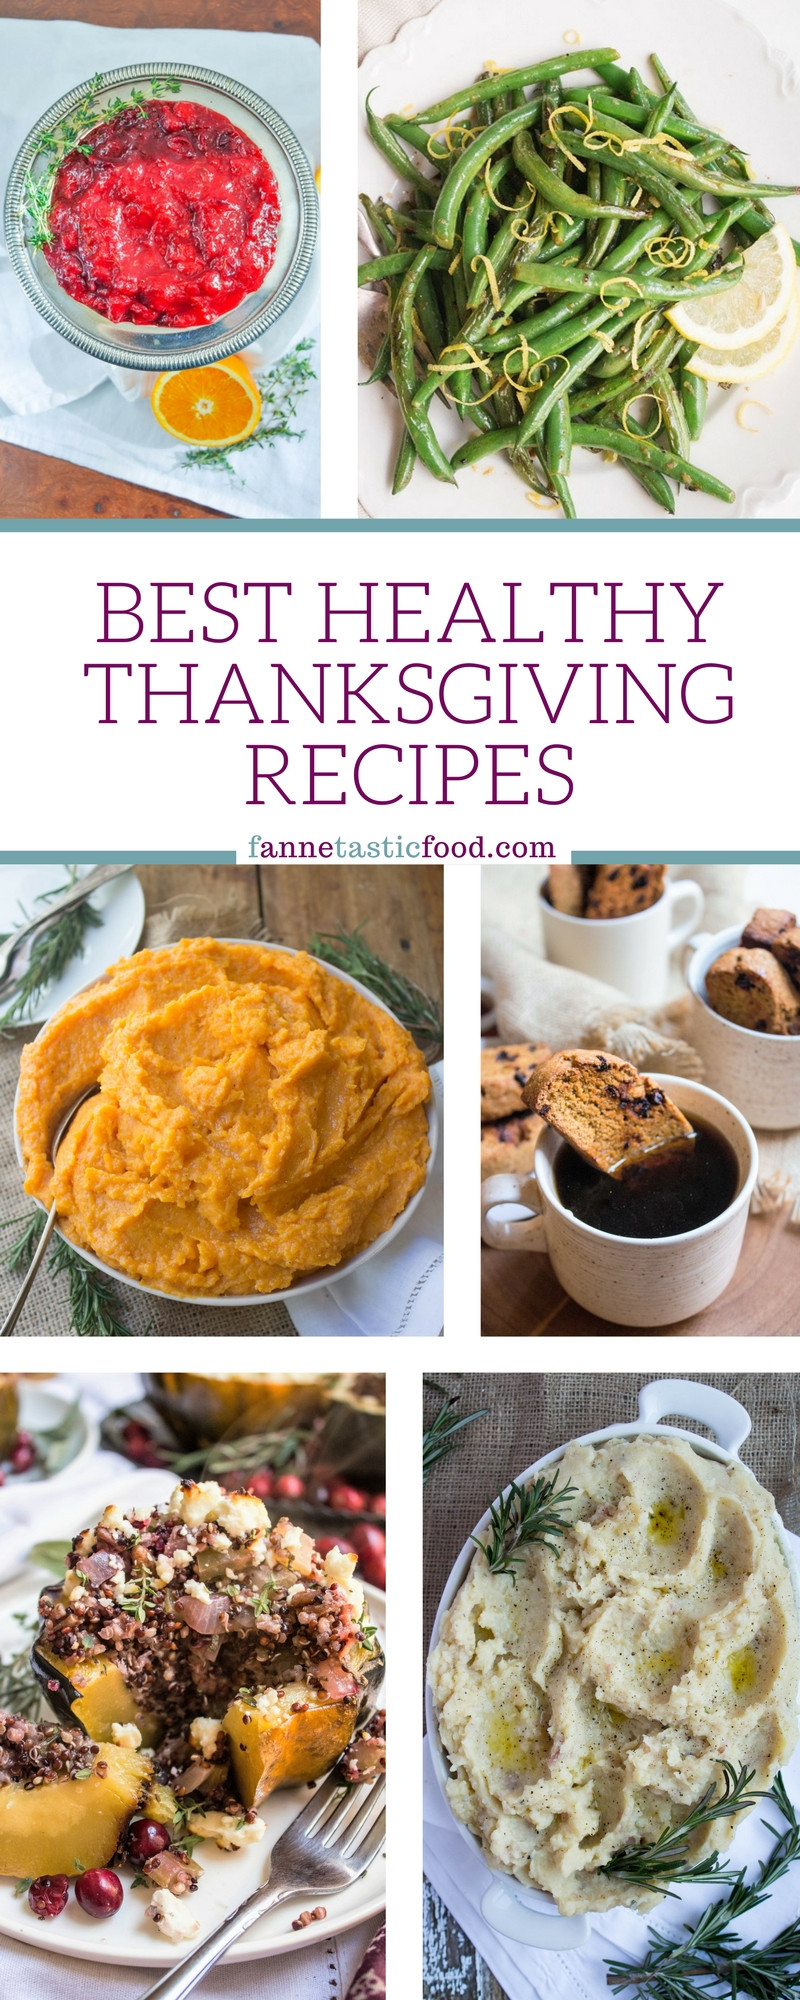 Quick And Easy Thanksgiving Recipes
 Best Healthy Thanksgiving Recipes